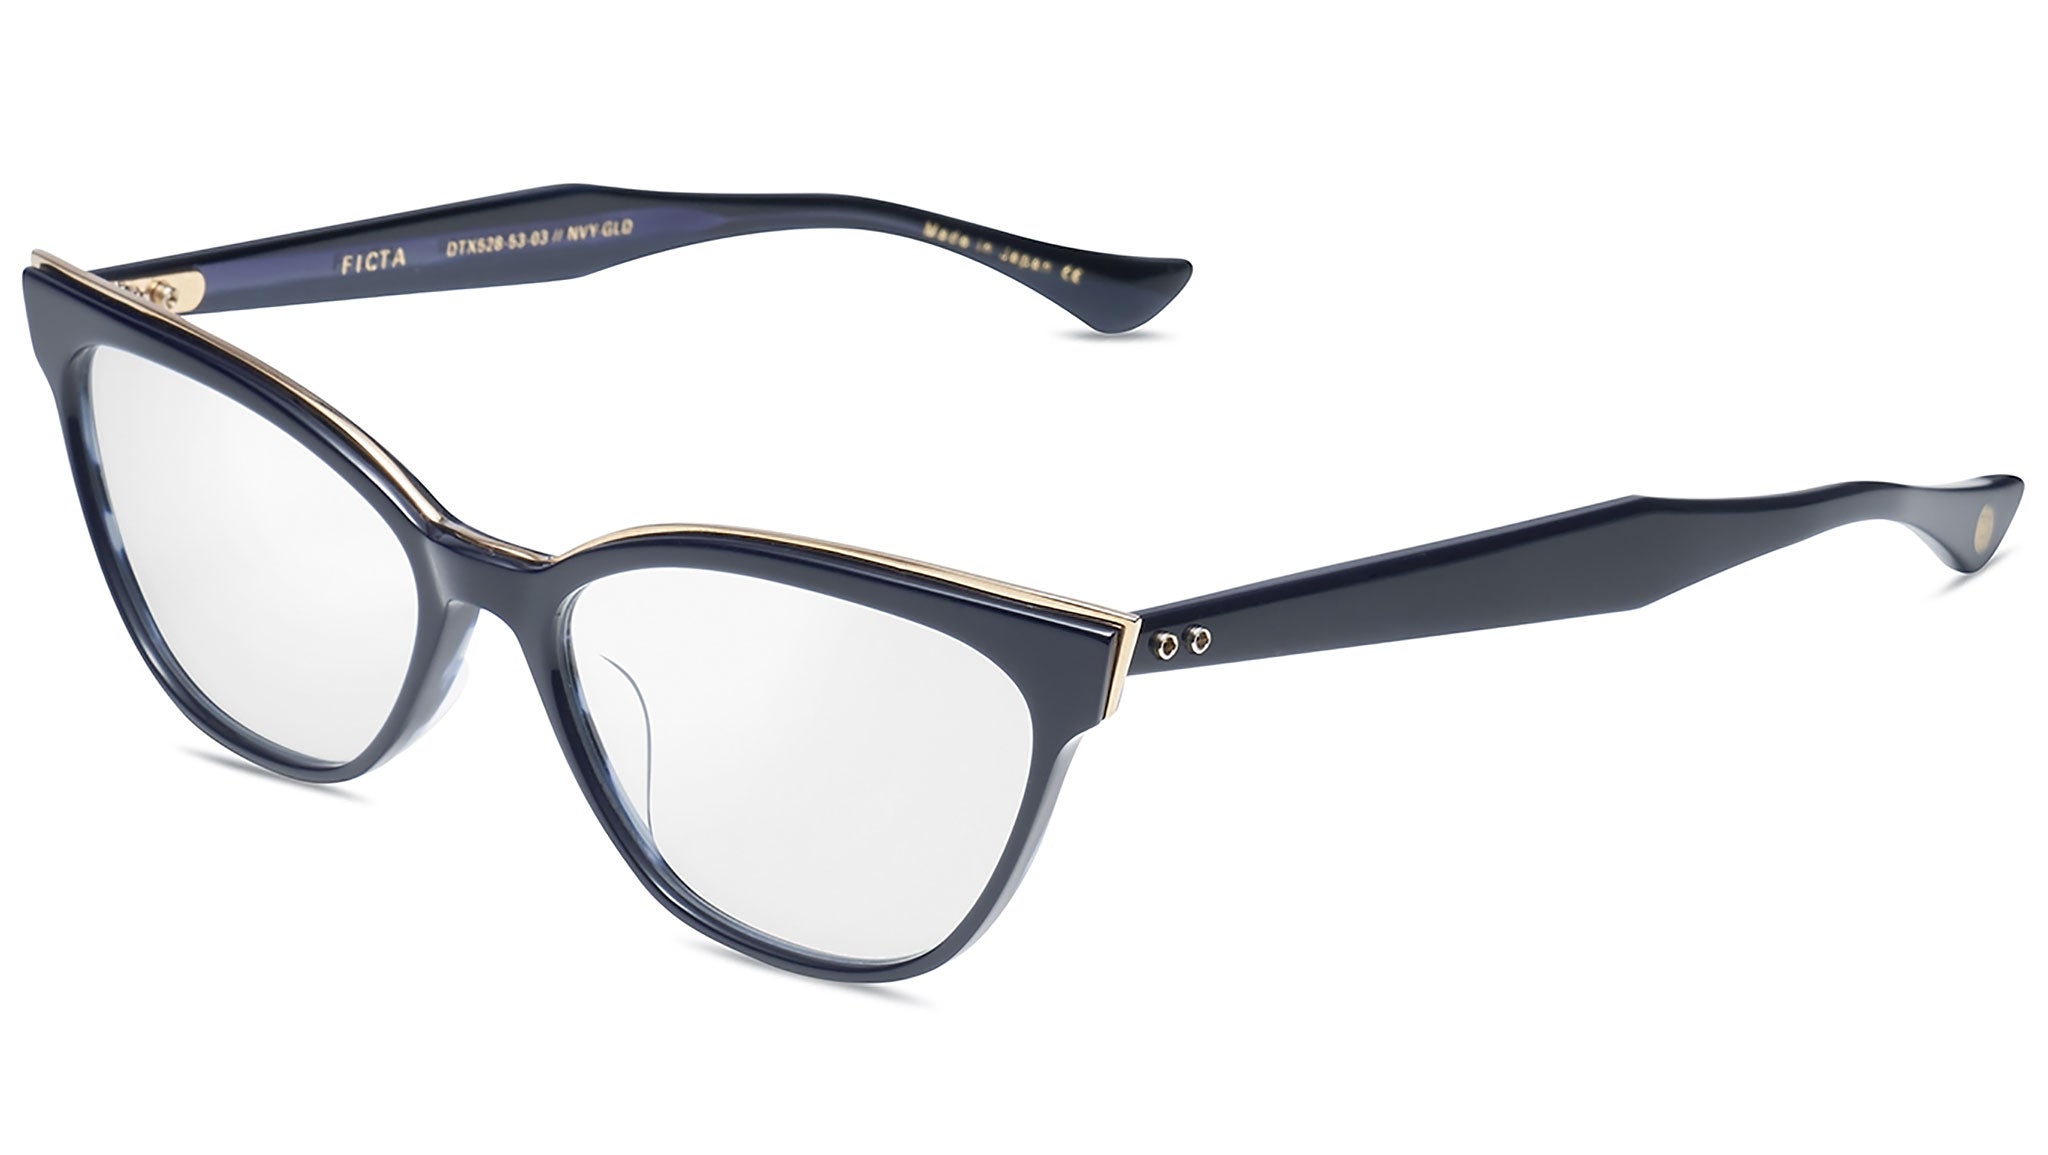 Ficta DTX 528 03 navy and gold